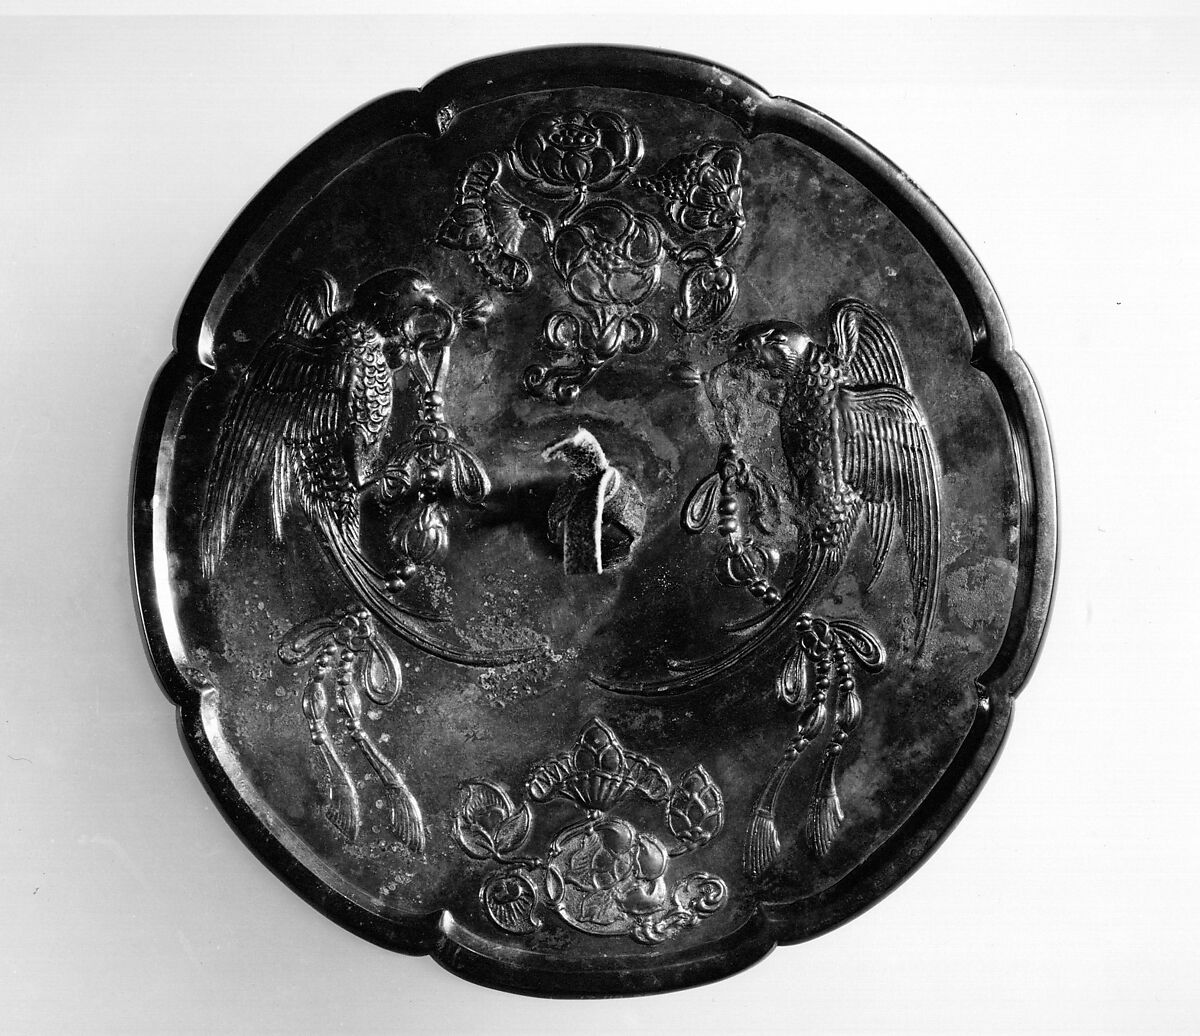 Mirror with parrots and flowers, Bronze, China 